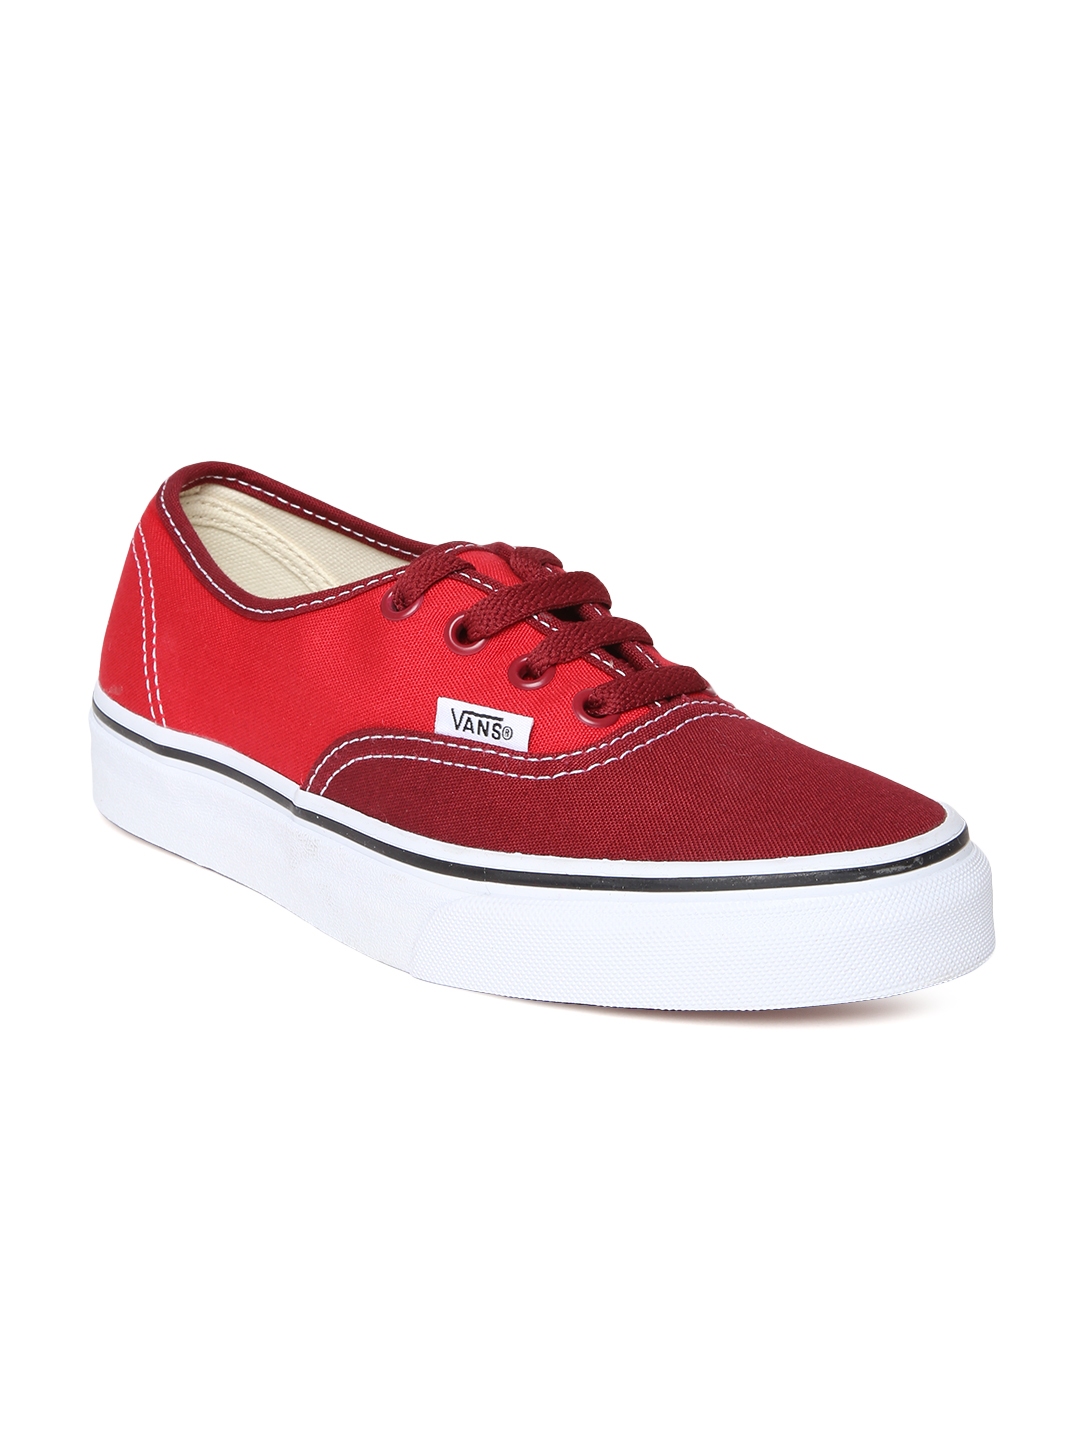 Buy Vans Unisex Red Canvas Sneakers - Casual Shoes for Unisex 870146 ...